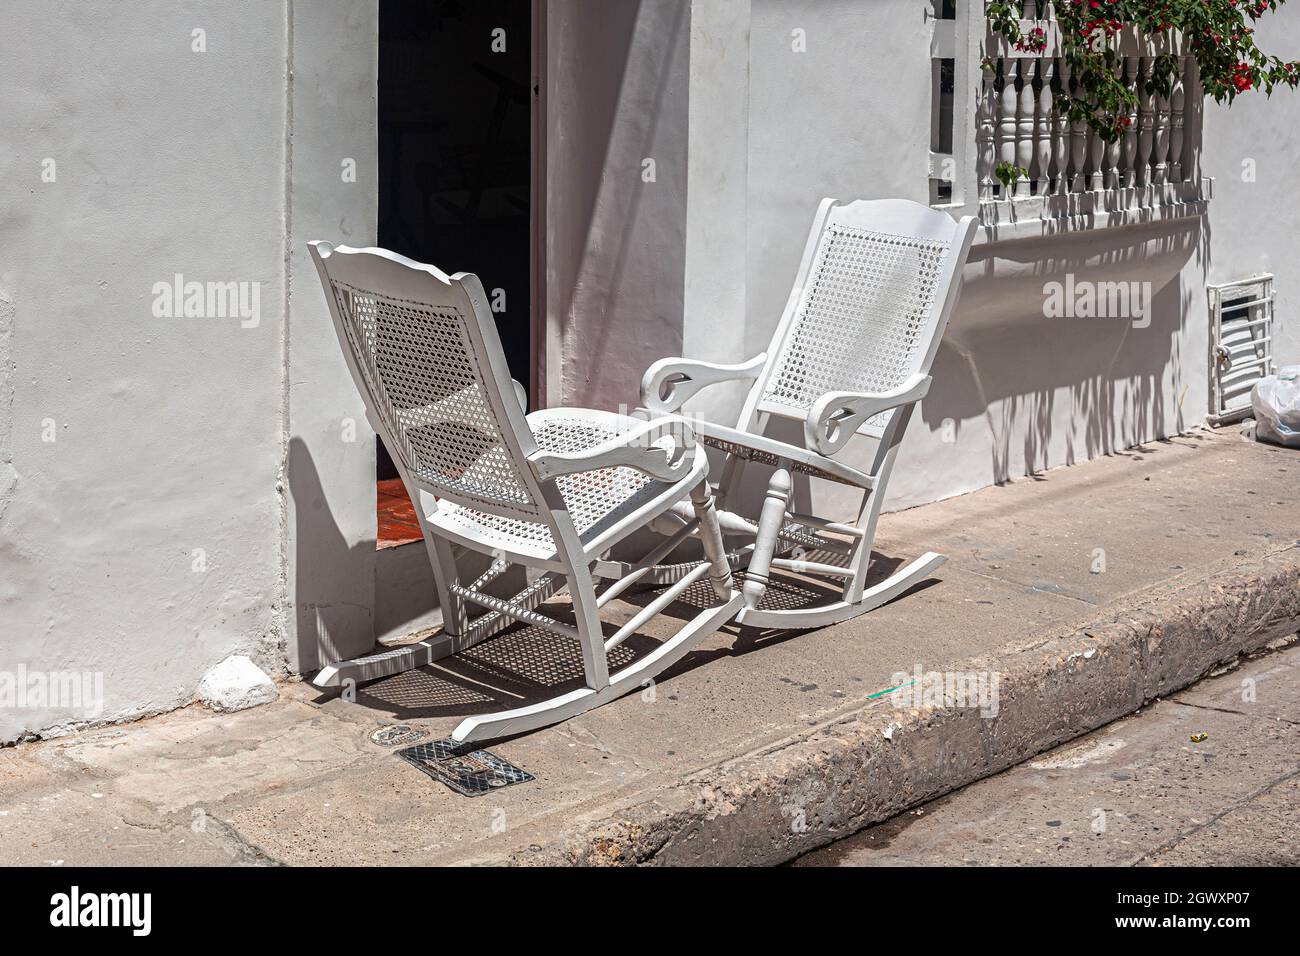 Two wooden rocking chairs on a pavement, just outside a Republican colonial house, Cartagena de Indias, Colombia. Stock Photo